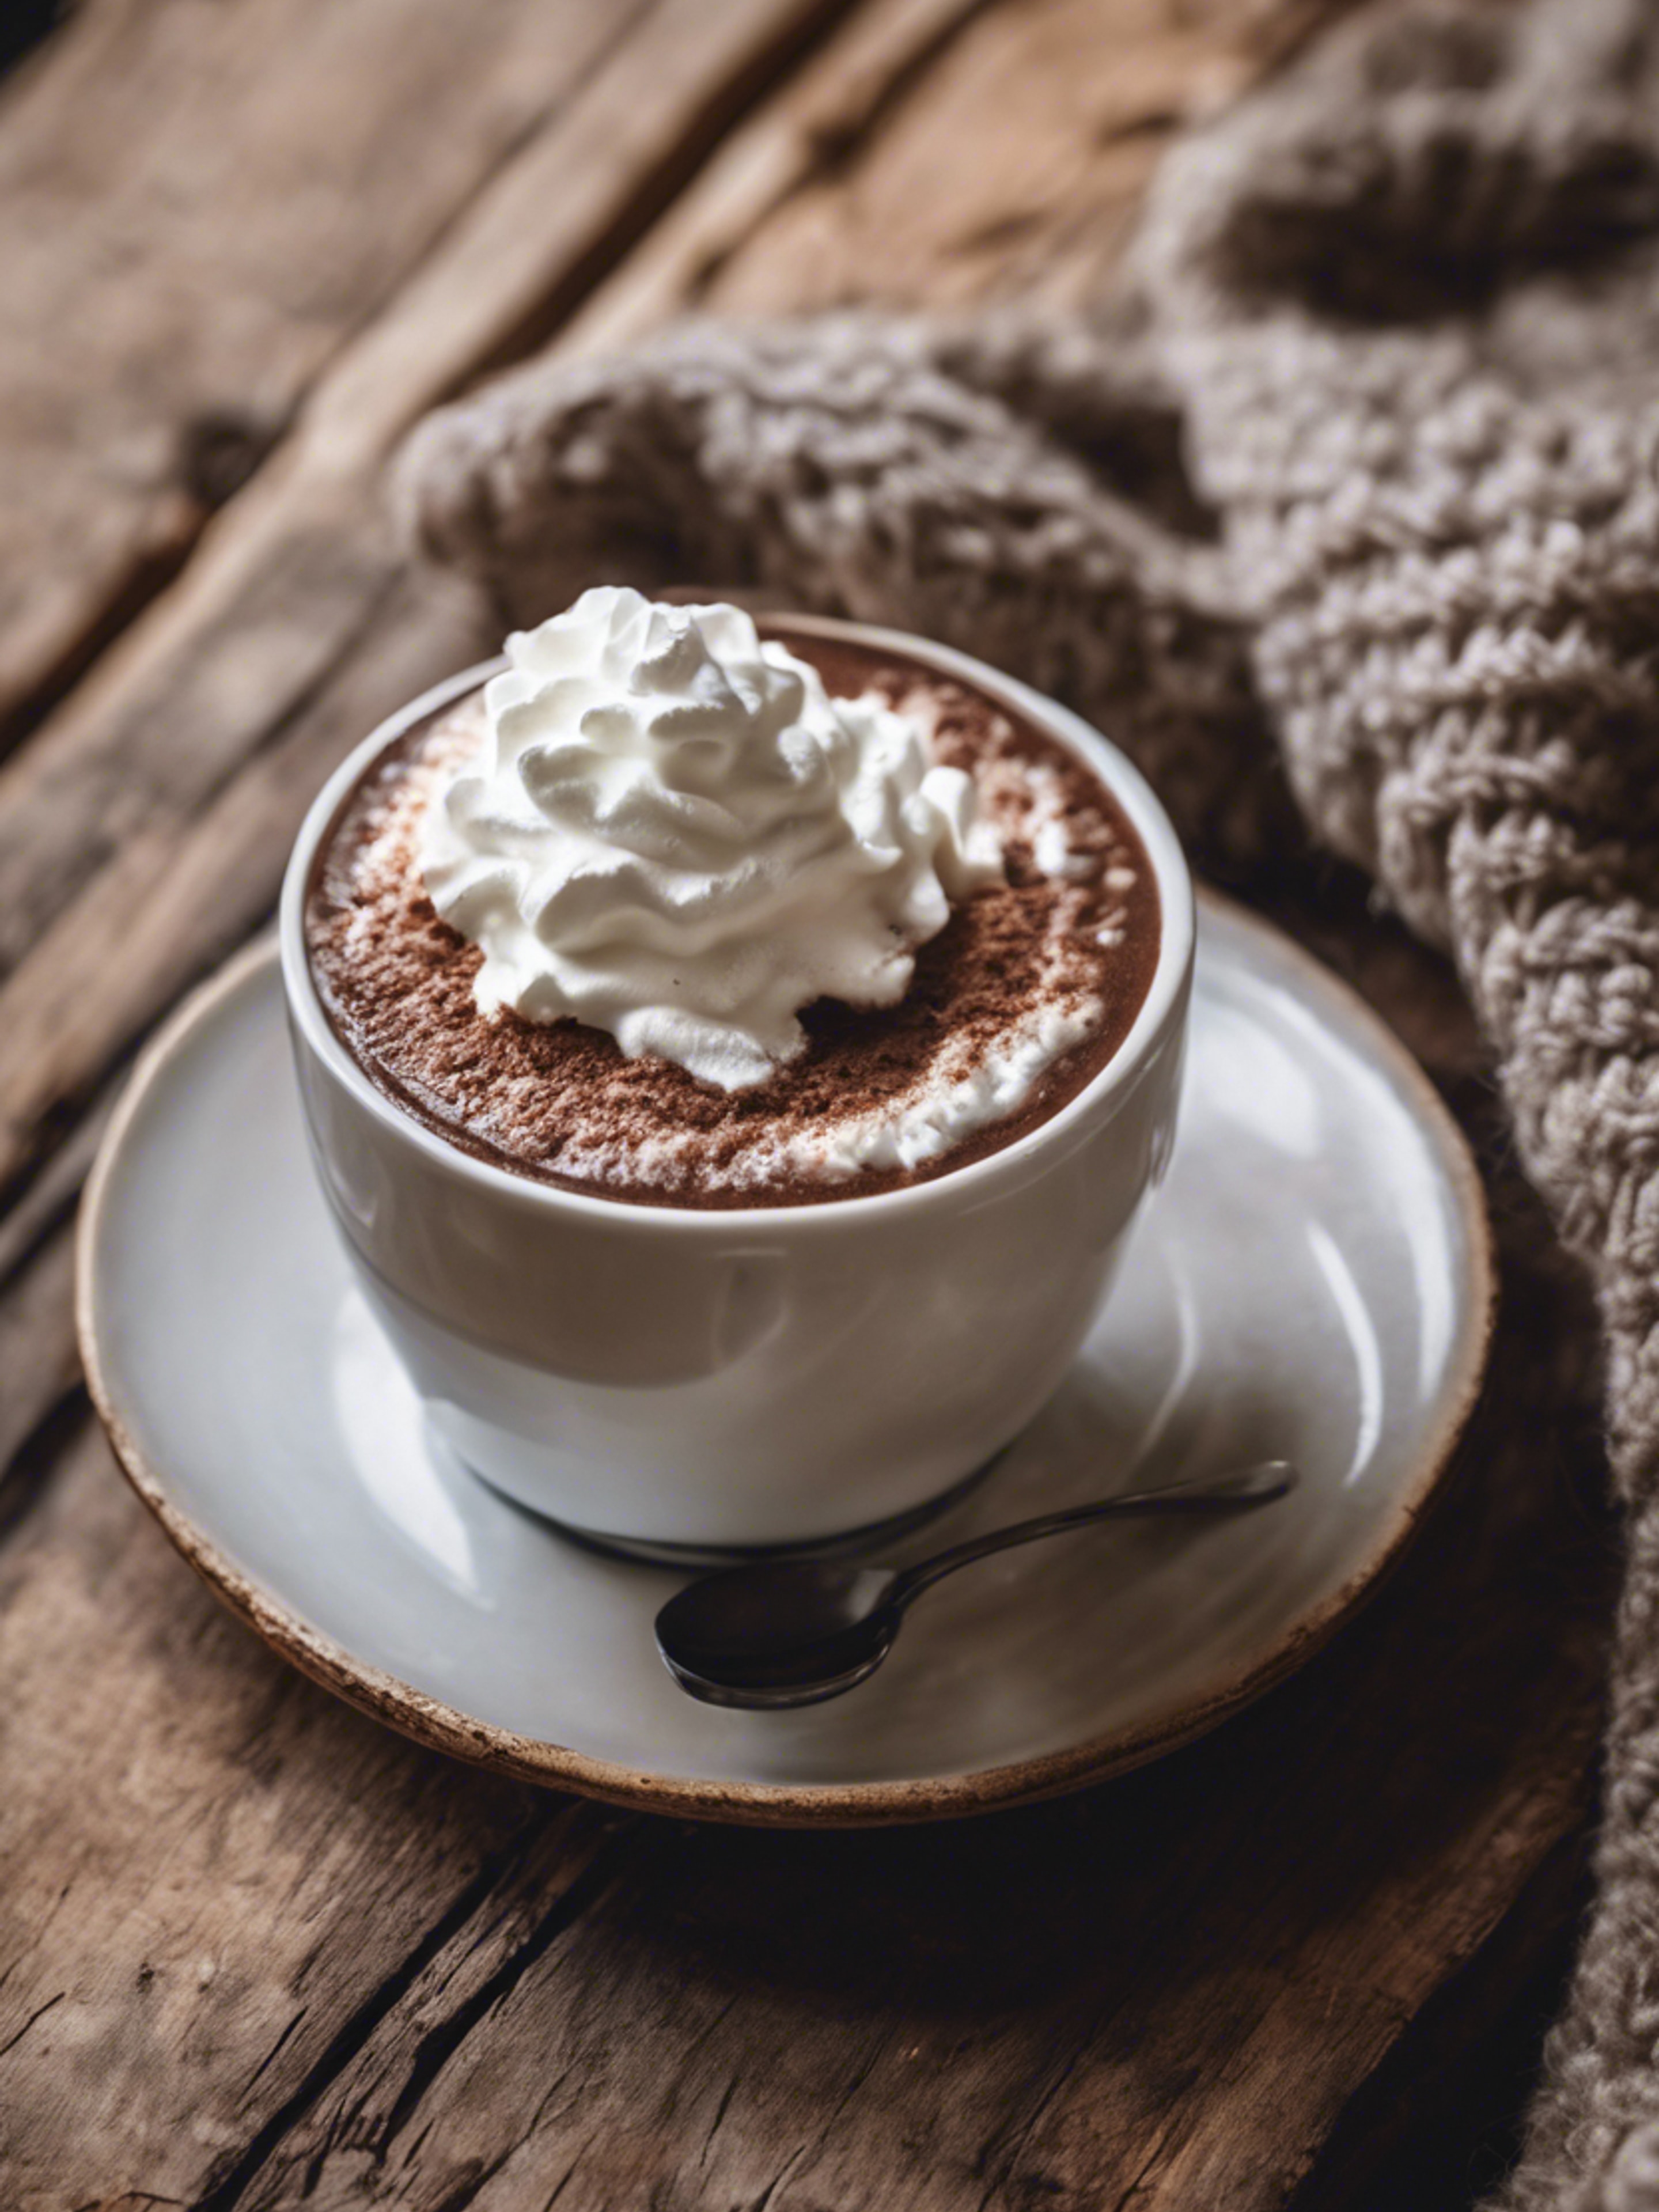 A porcelain cup of steaming hot chocolate topped with whipped cream, next to a crochet coaster on a rough wooden table. Ταπετσαρία[f8ececc79cde48c88690]